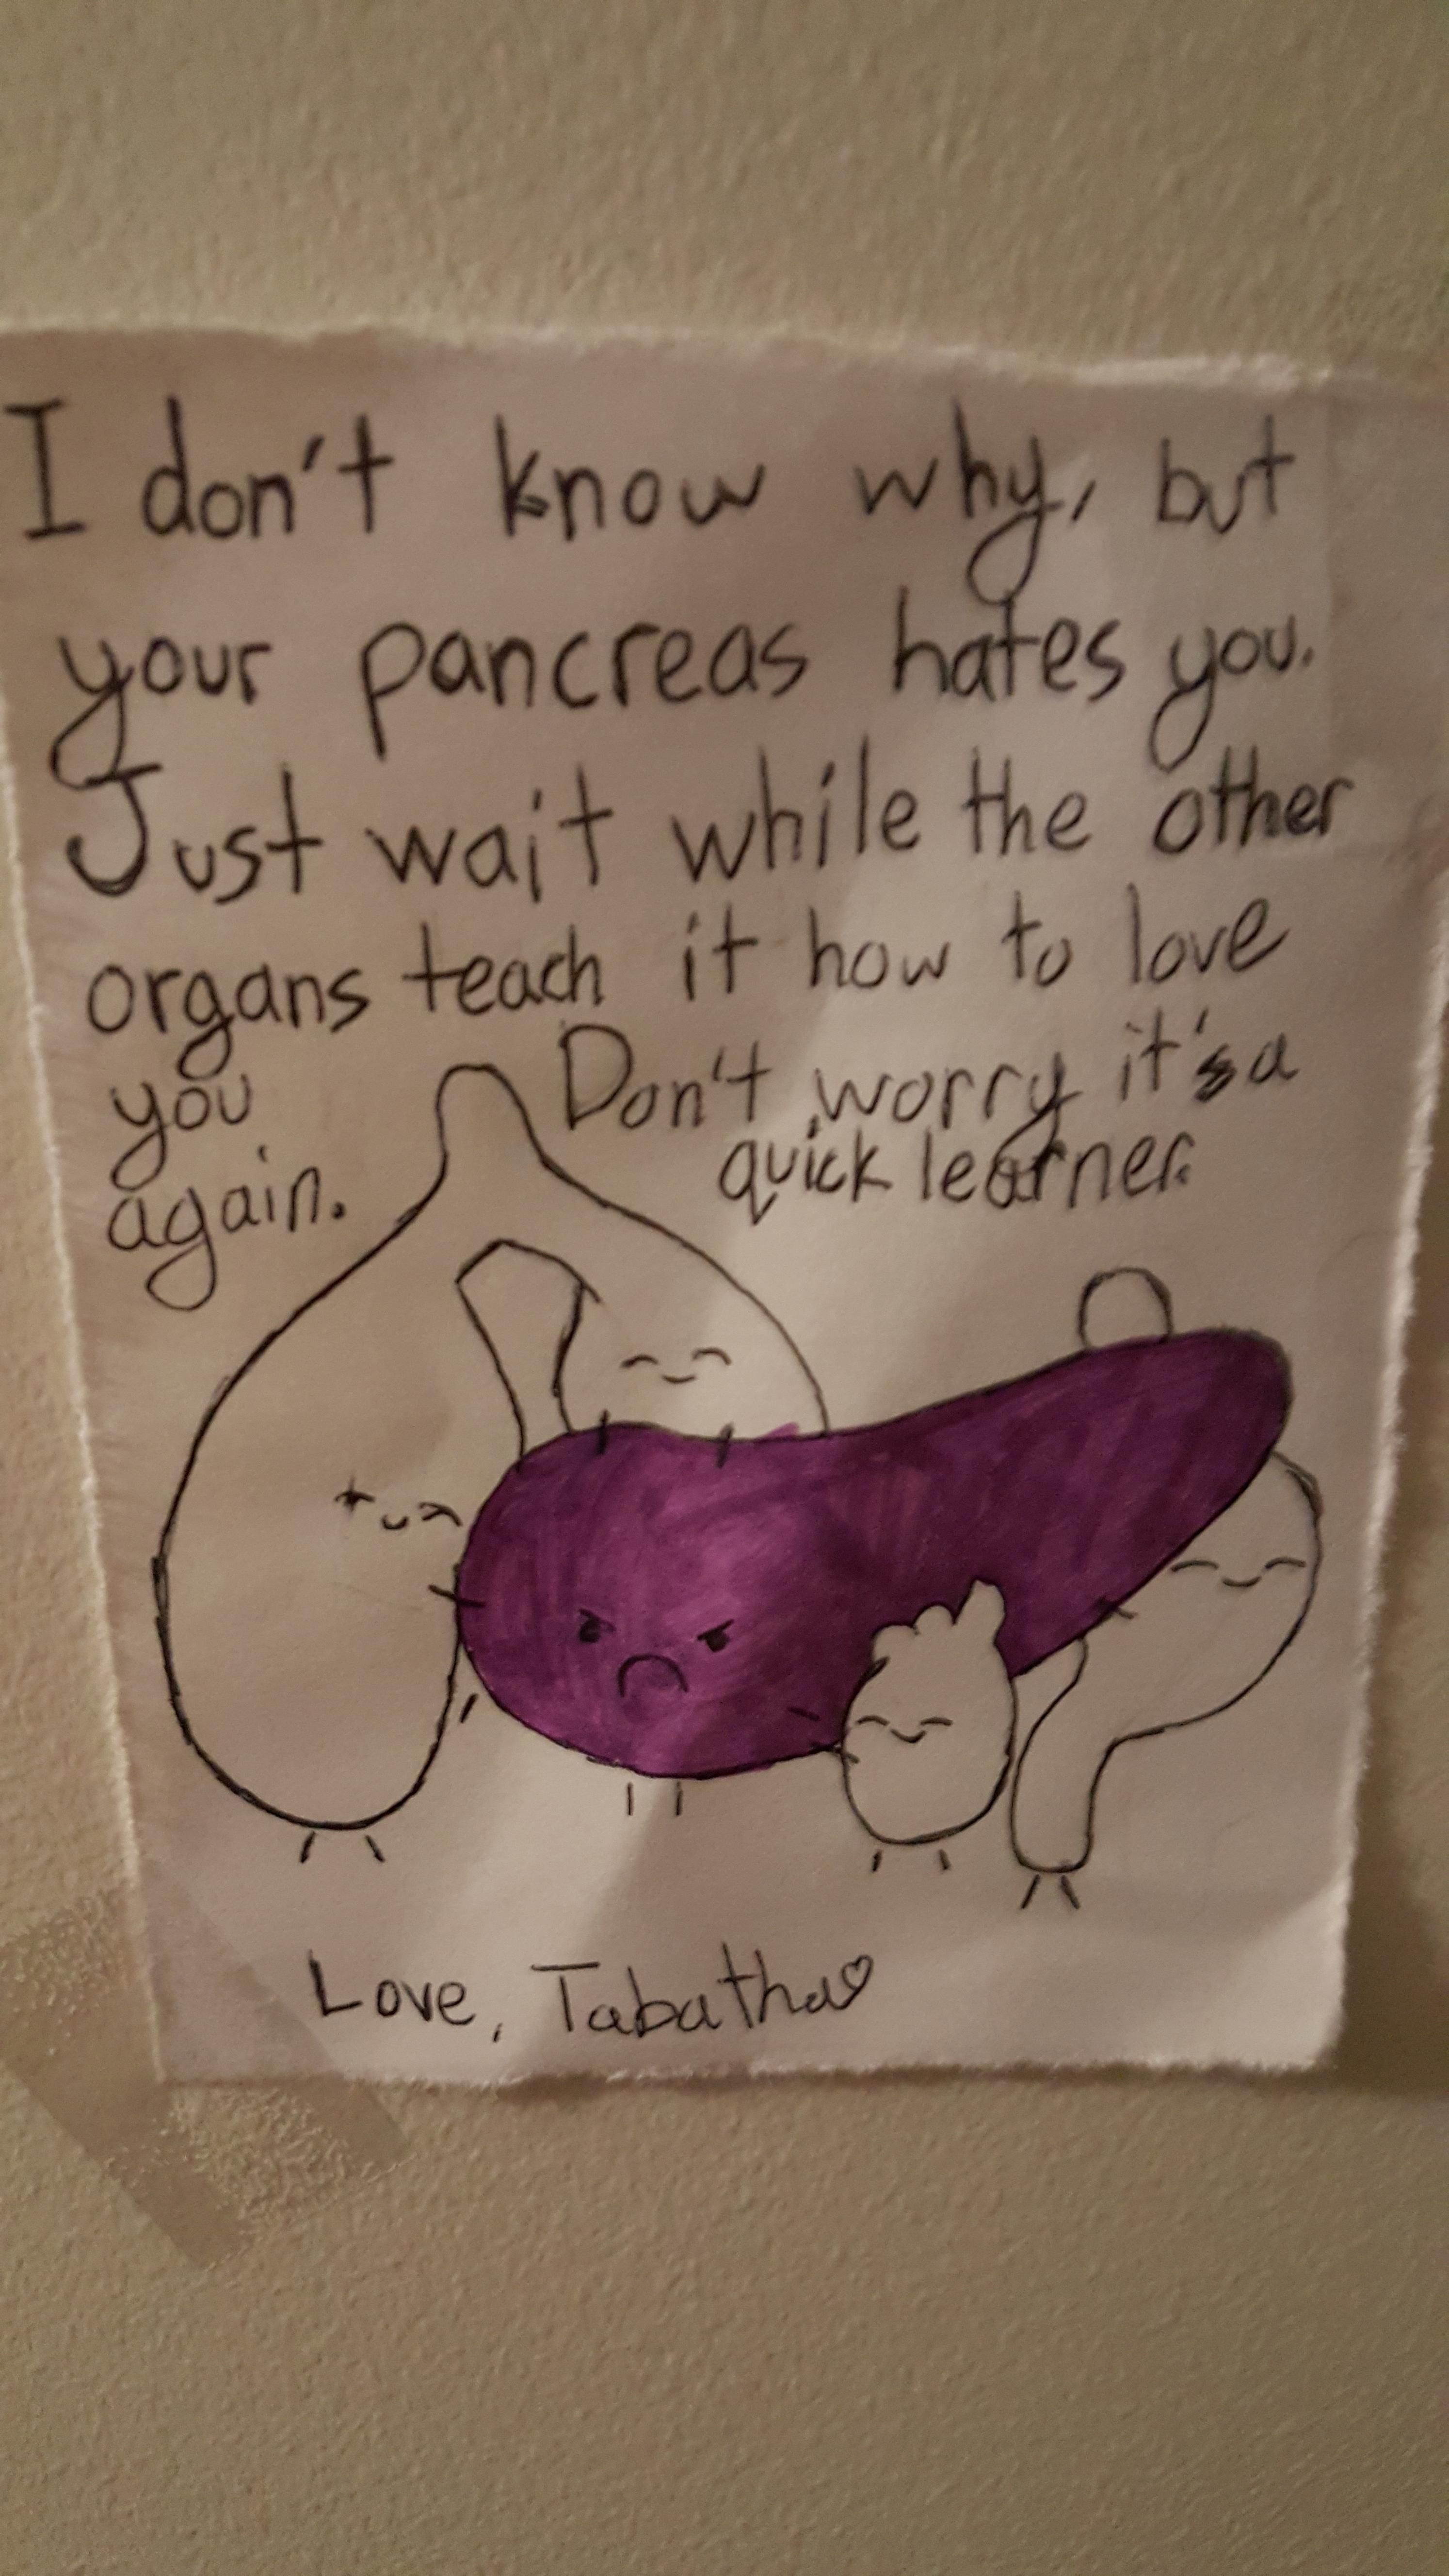 in the hospital with pancreatitis, this is the get well soon card and my daughter drew for me.